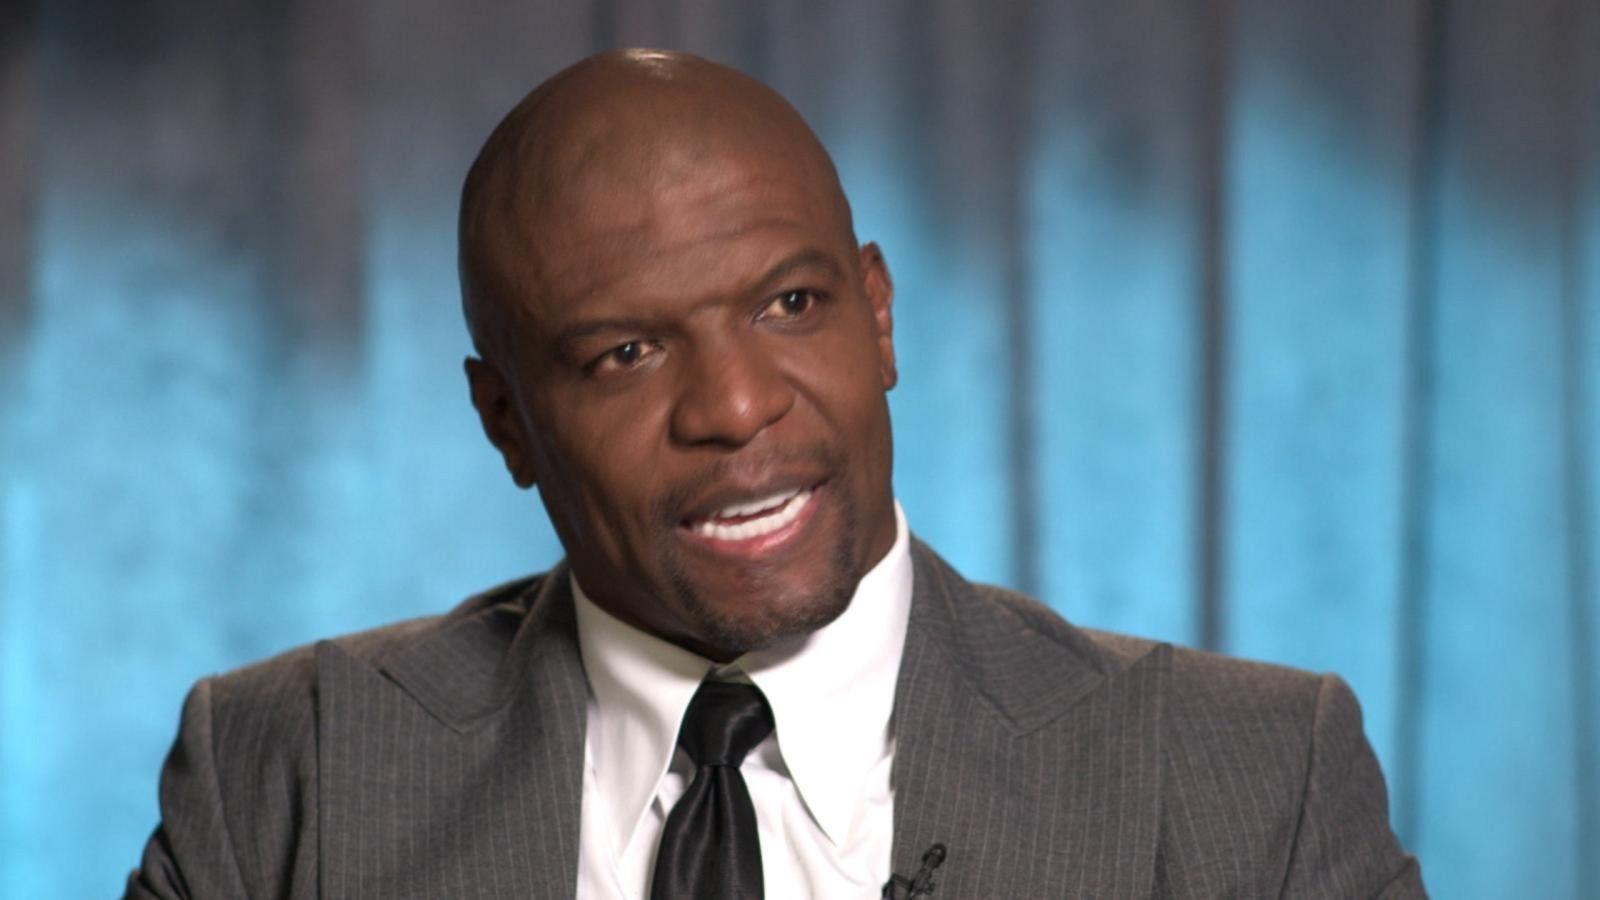 Terry Crews files lawsuit against agent he alleges sexually